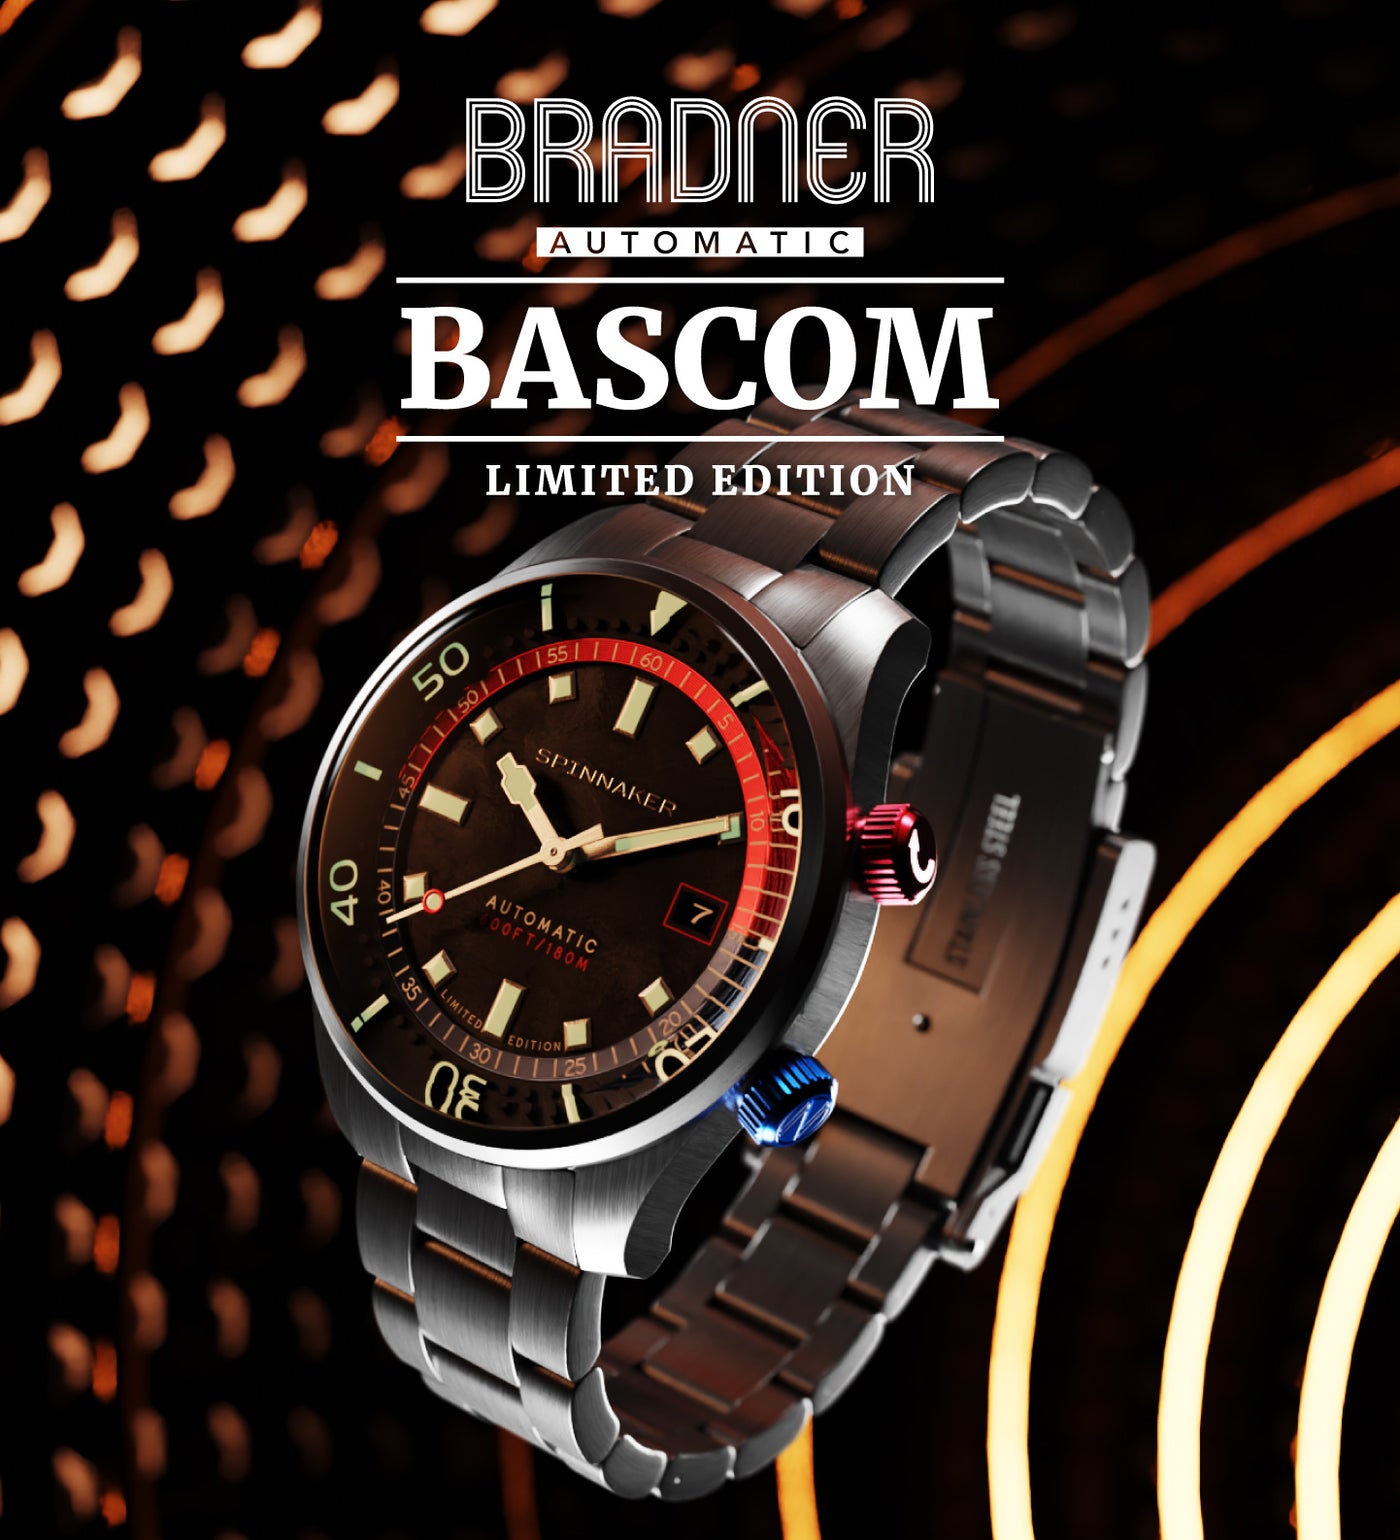 BRADNER AUTOMATIC BASCOM LIMITED EDITION SP-5111 – Spinnaker Watches